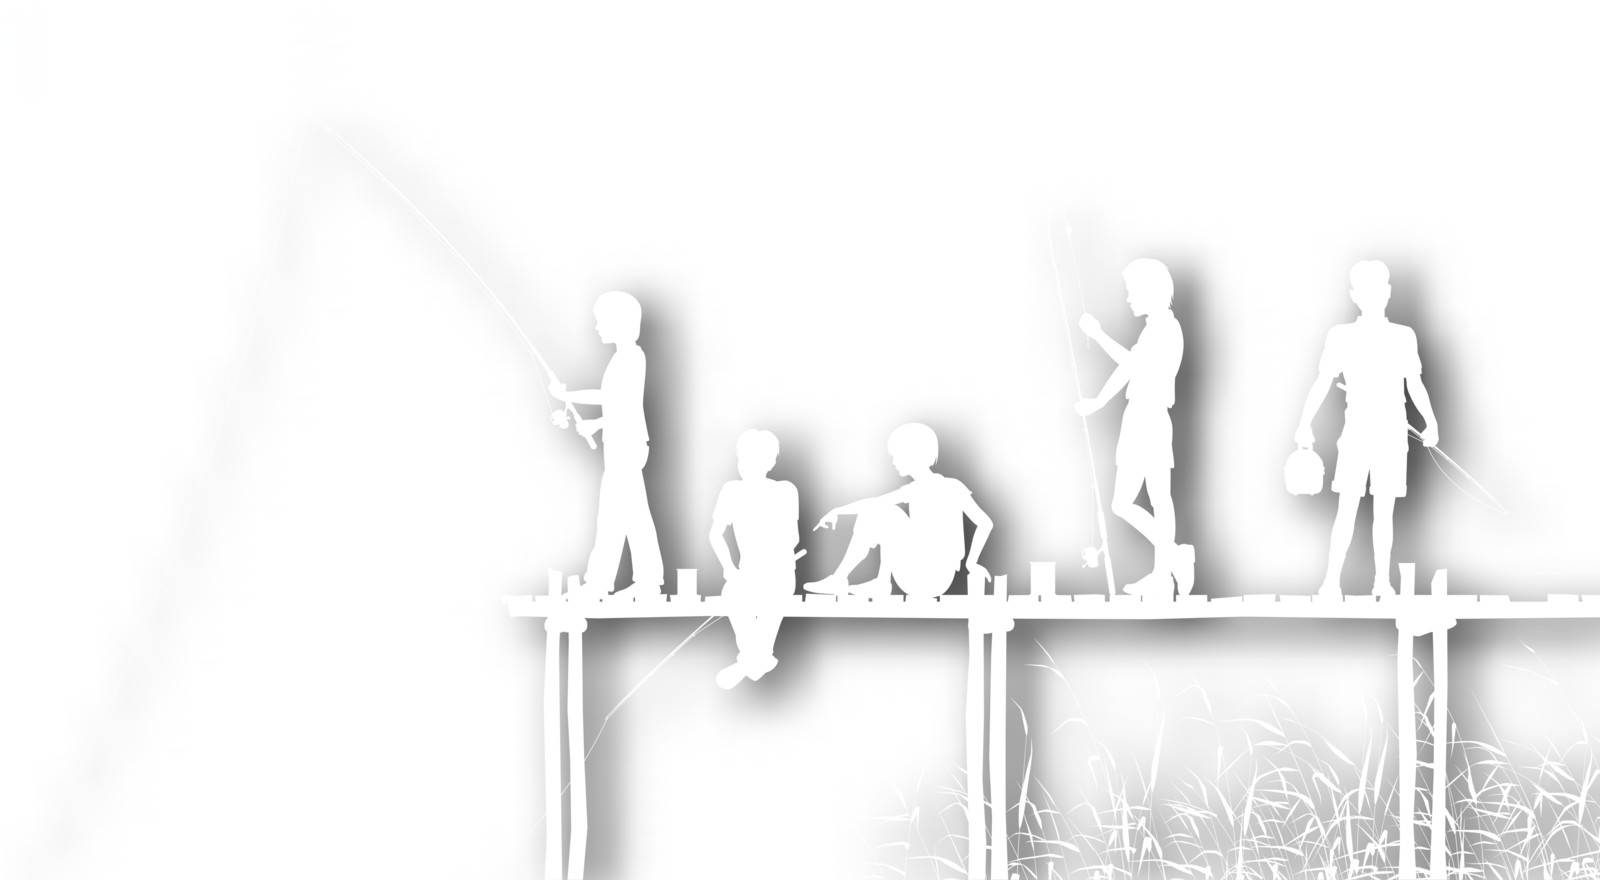 Editable vector cutout of children fishing from a wooden jetty with background shadow made using a gradient mesh